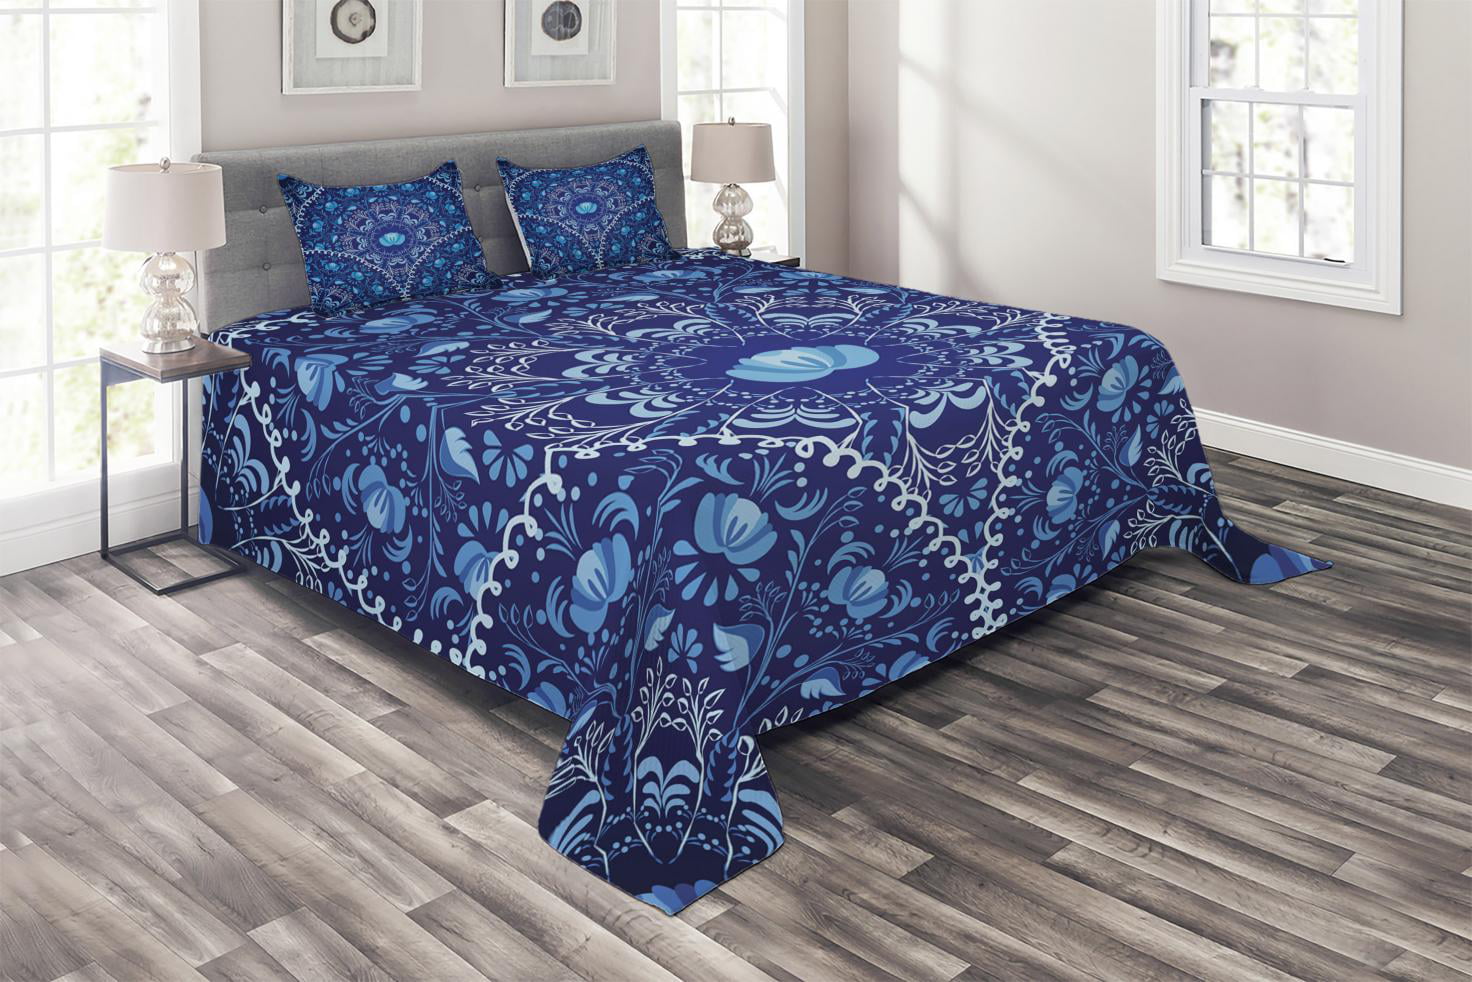 Navy Blue Coverlet Set Circular And Floral Alike Oriental Style